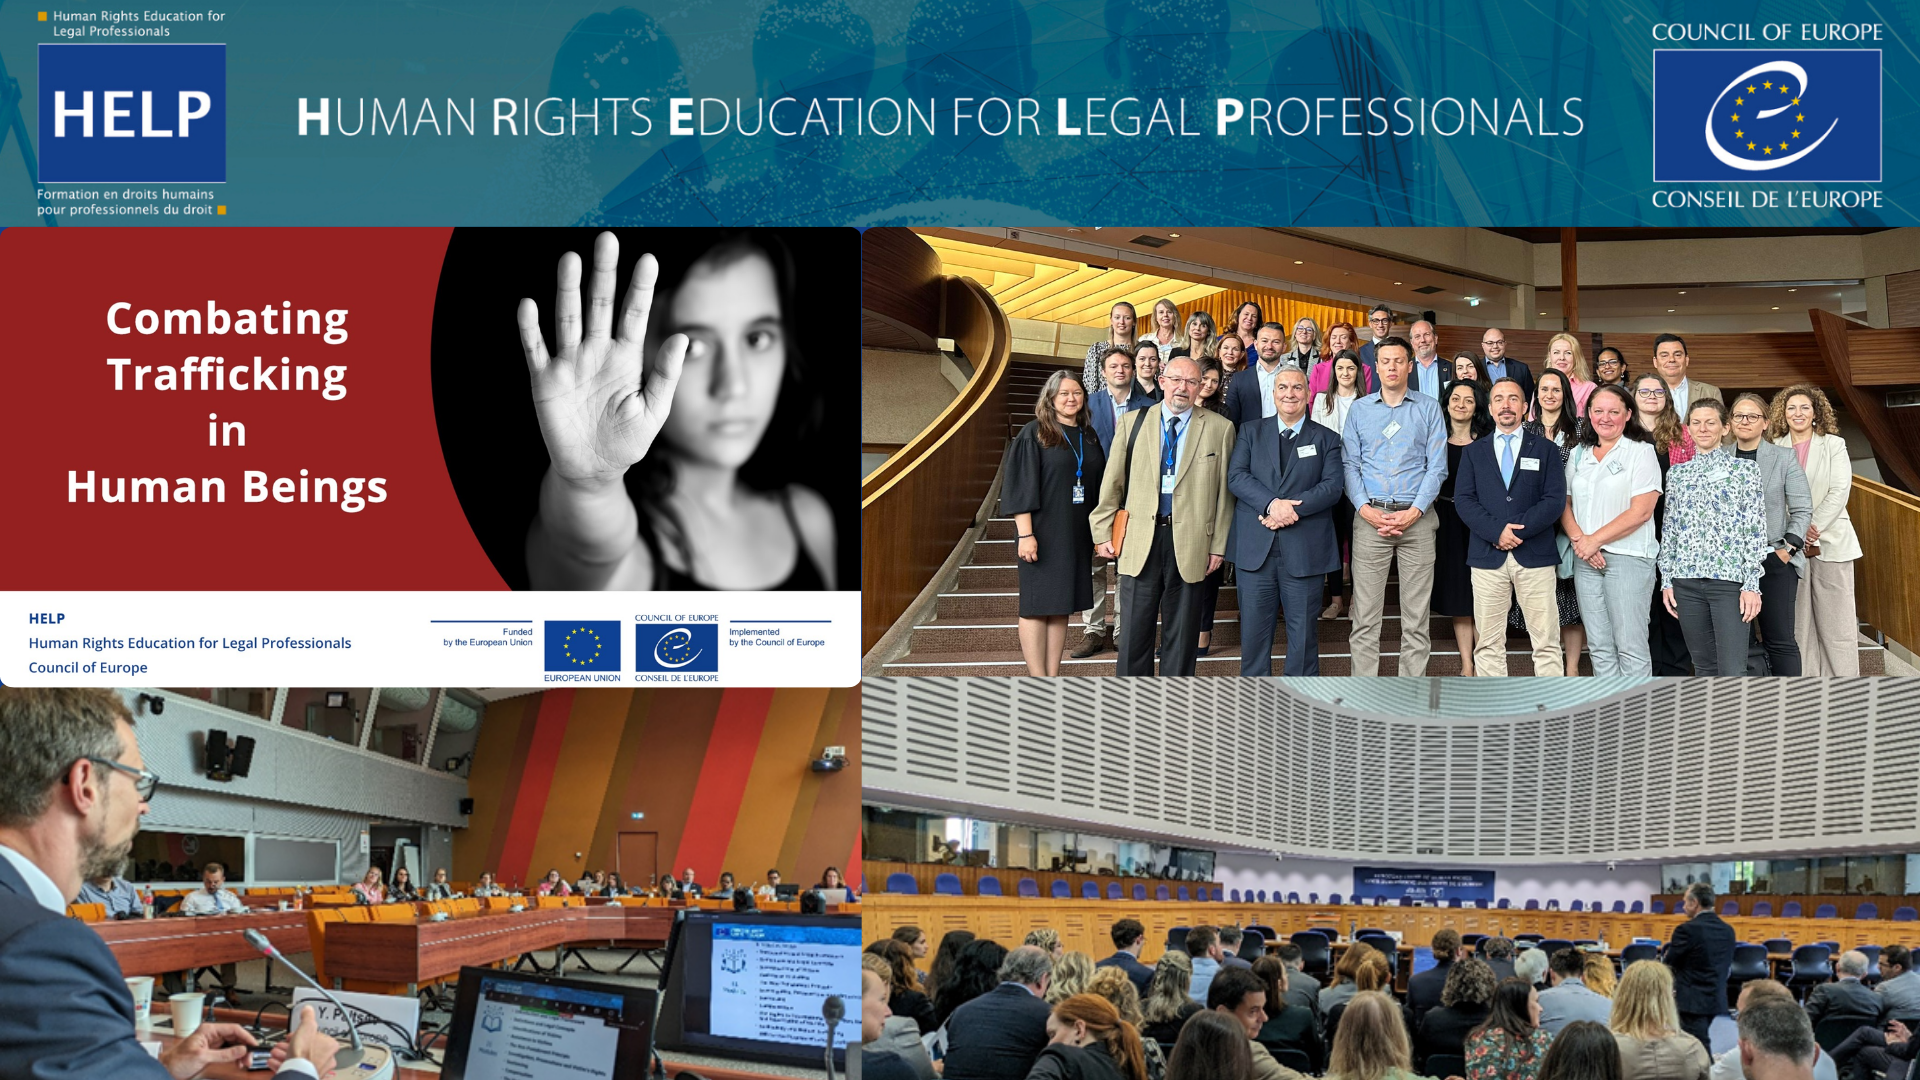 Combating Trafficking in Human Beings: Council of Europe HELP course launched for EU judges and prosecutors